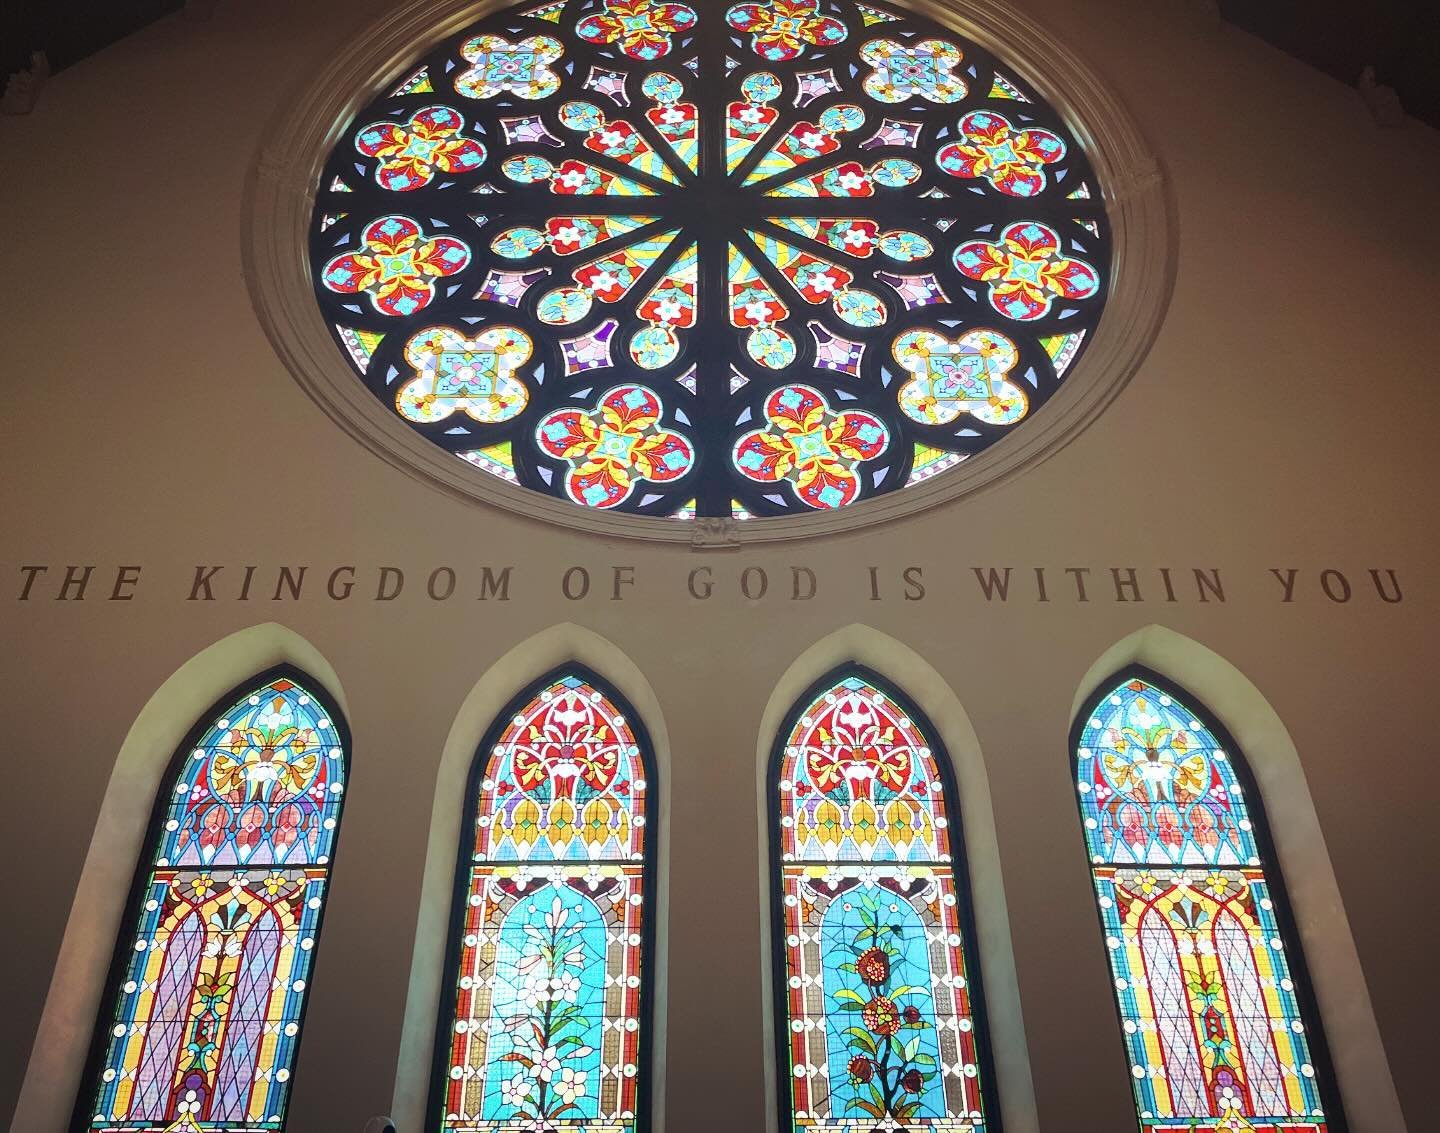 ✨ &ldquo;The Kingdom of God is within You.&rdquo; ✨

I captured this profound phrase during a recent visit to a church to be with Krishna Das, and it resonated deeply. It&rsquo;s a beautiful reminder that within each of us lies an incredible power&md